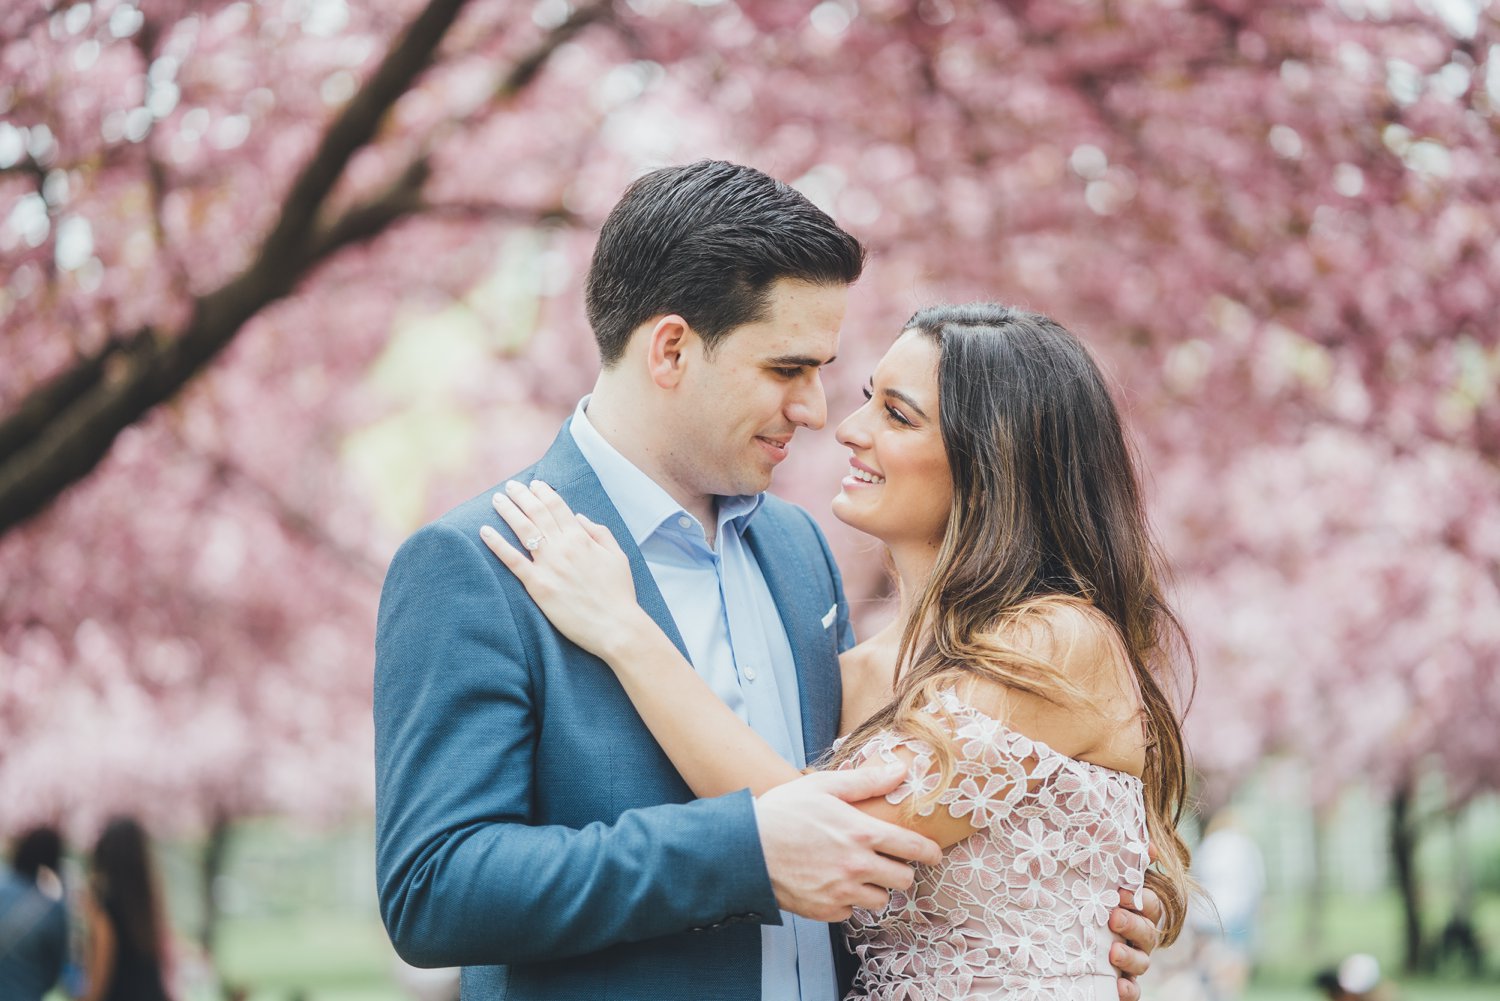 70NYC-NJ-ENGAGEMENT-PHOTOGRAPHY-BY-INTOTHESTORY-MOO-JAE.JPG